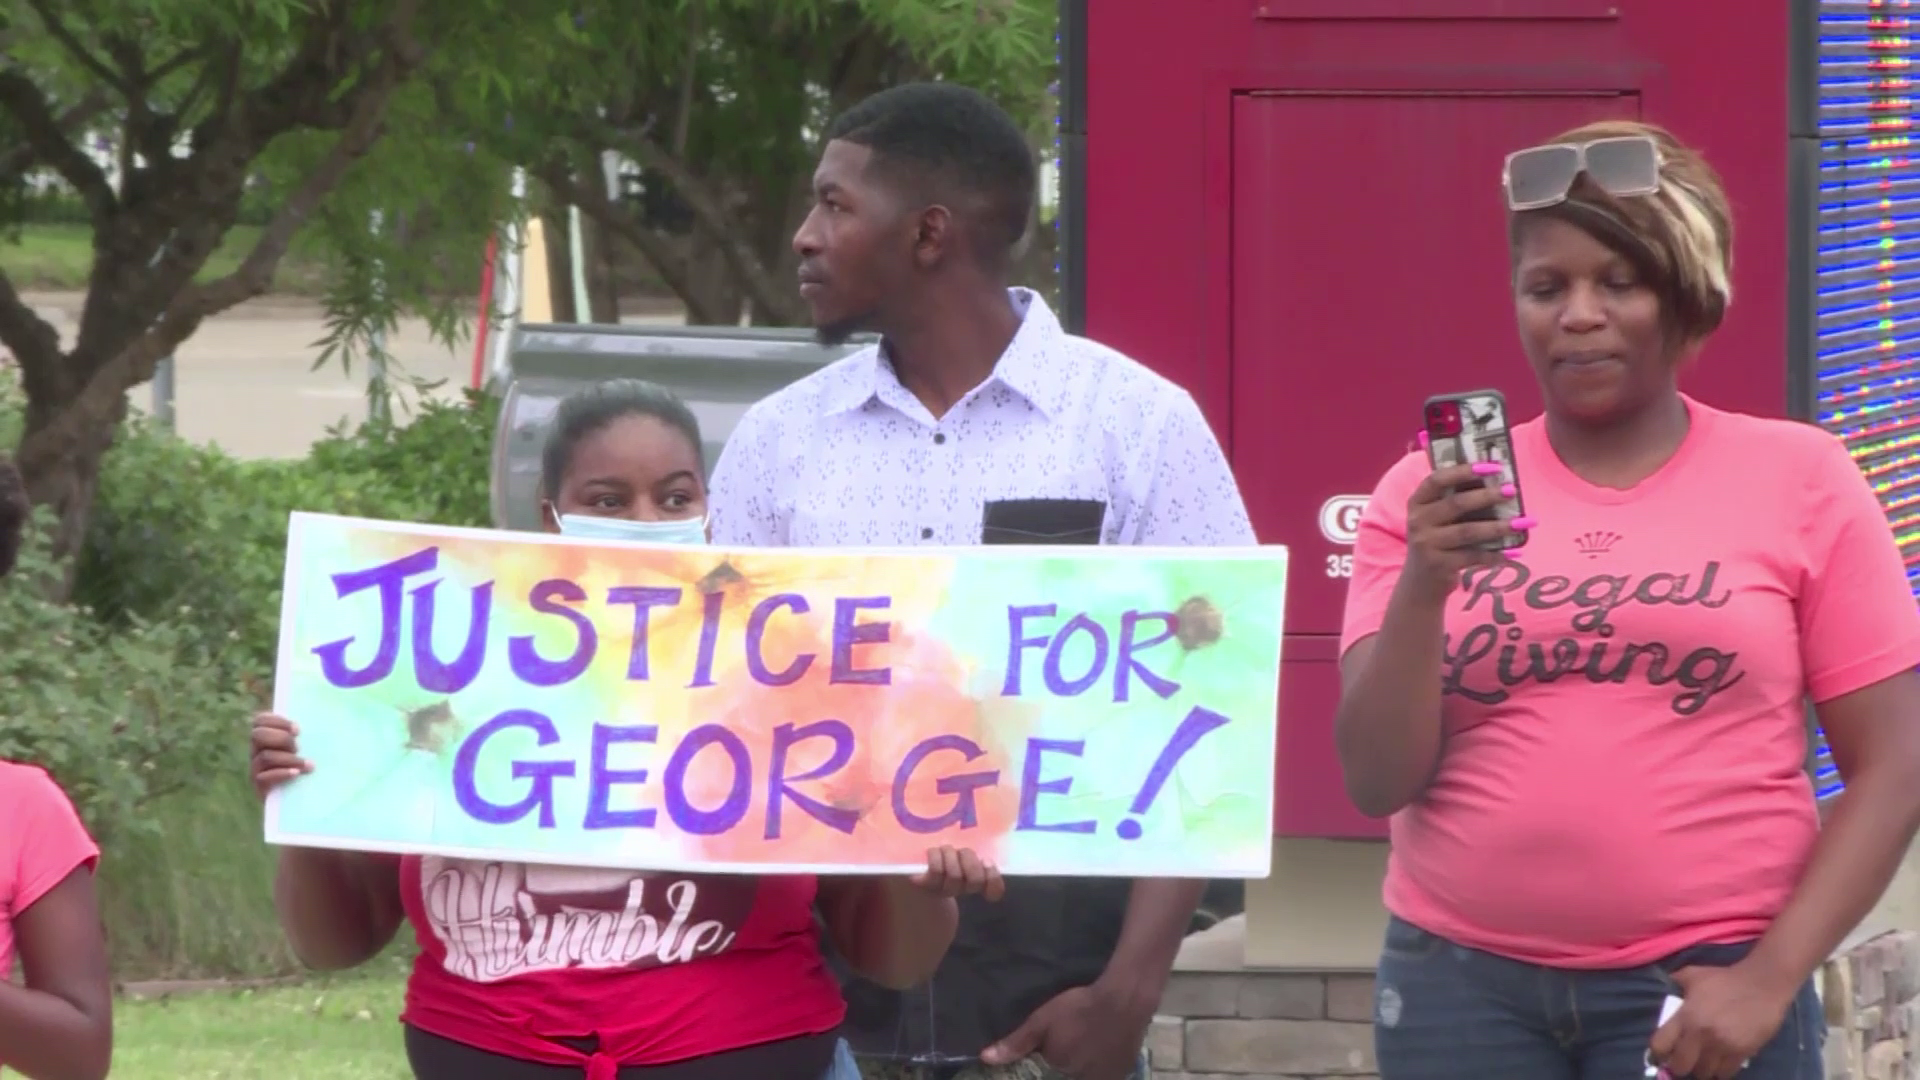 George Floyd's son, a Bryan, Texas resident, attended a Black Lives Matter demonstration on Sunday and denounced violence in other U.S. cities.